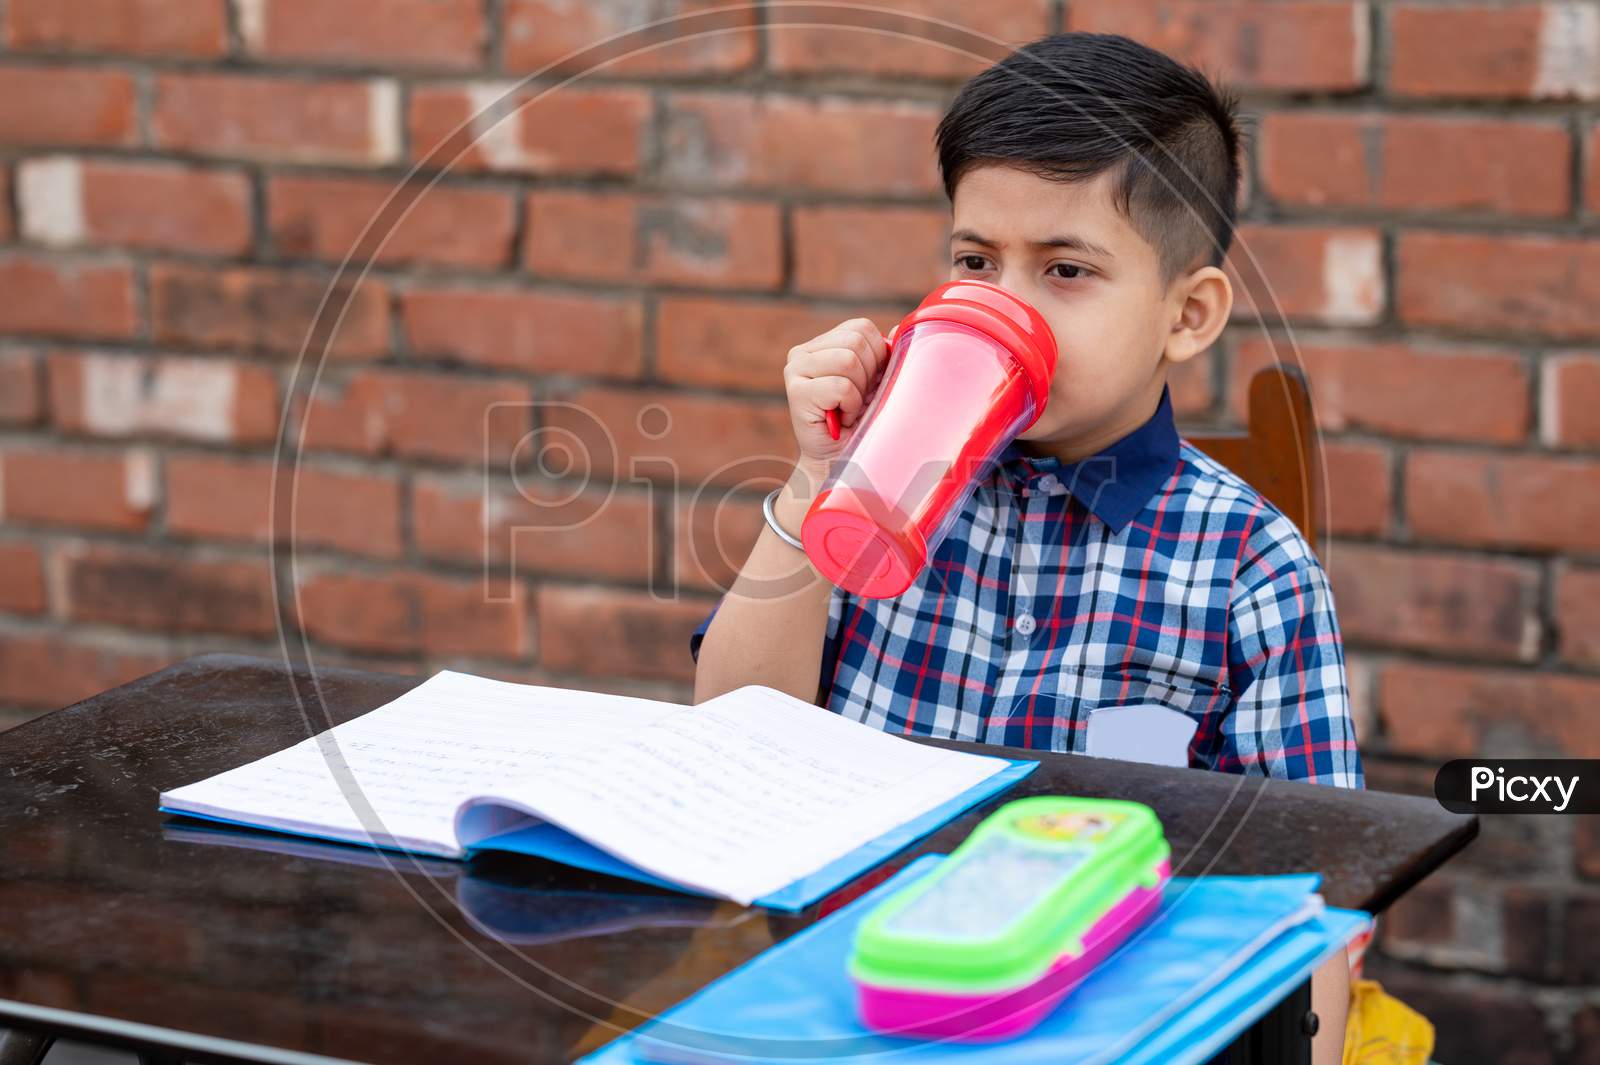 Primary School Student Drinking Water With Red Water Bottle While Sitting In Class On Study Table. Indian School Student In Classroom.